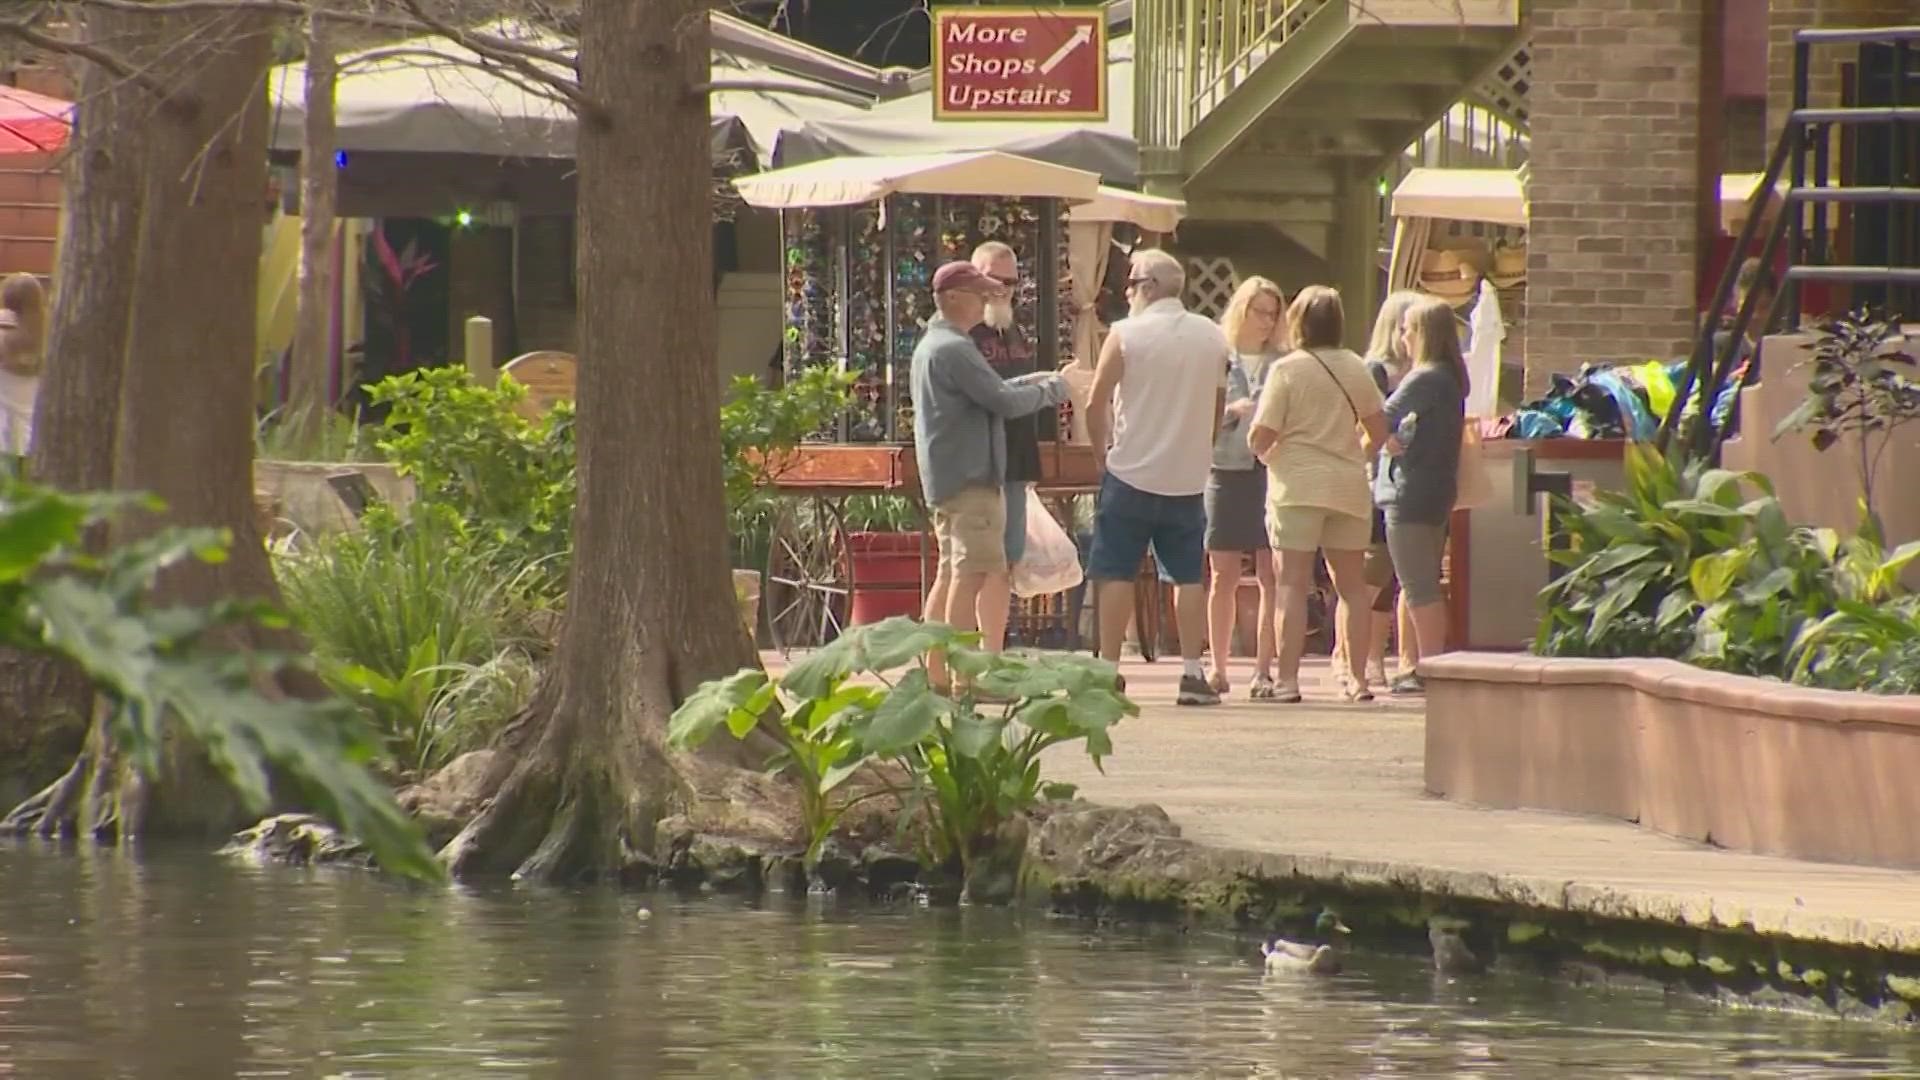 Tourism is roaring in Texas, and San Antonio is in the boom.